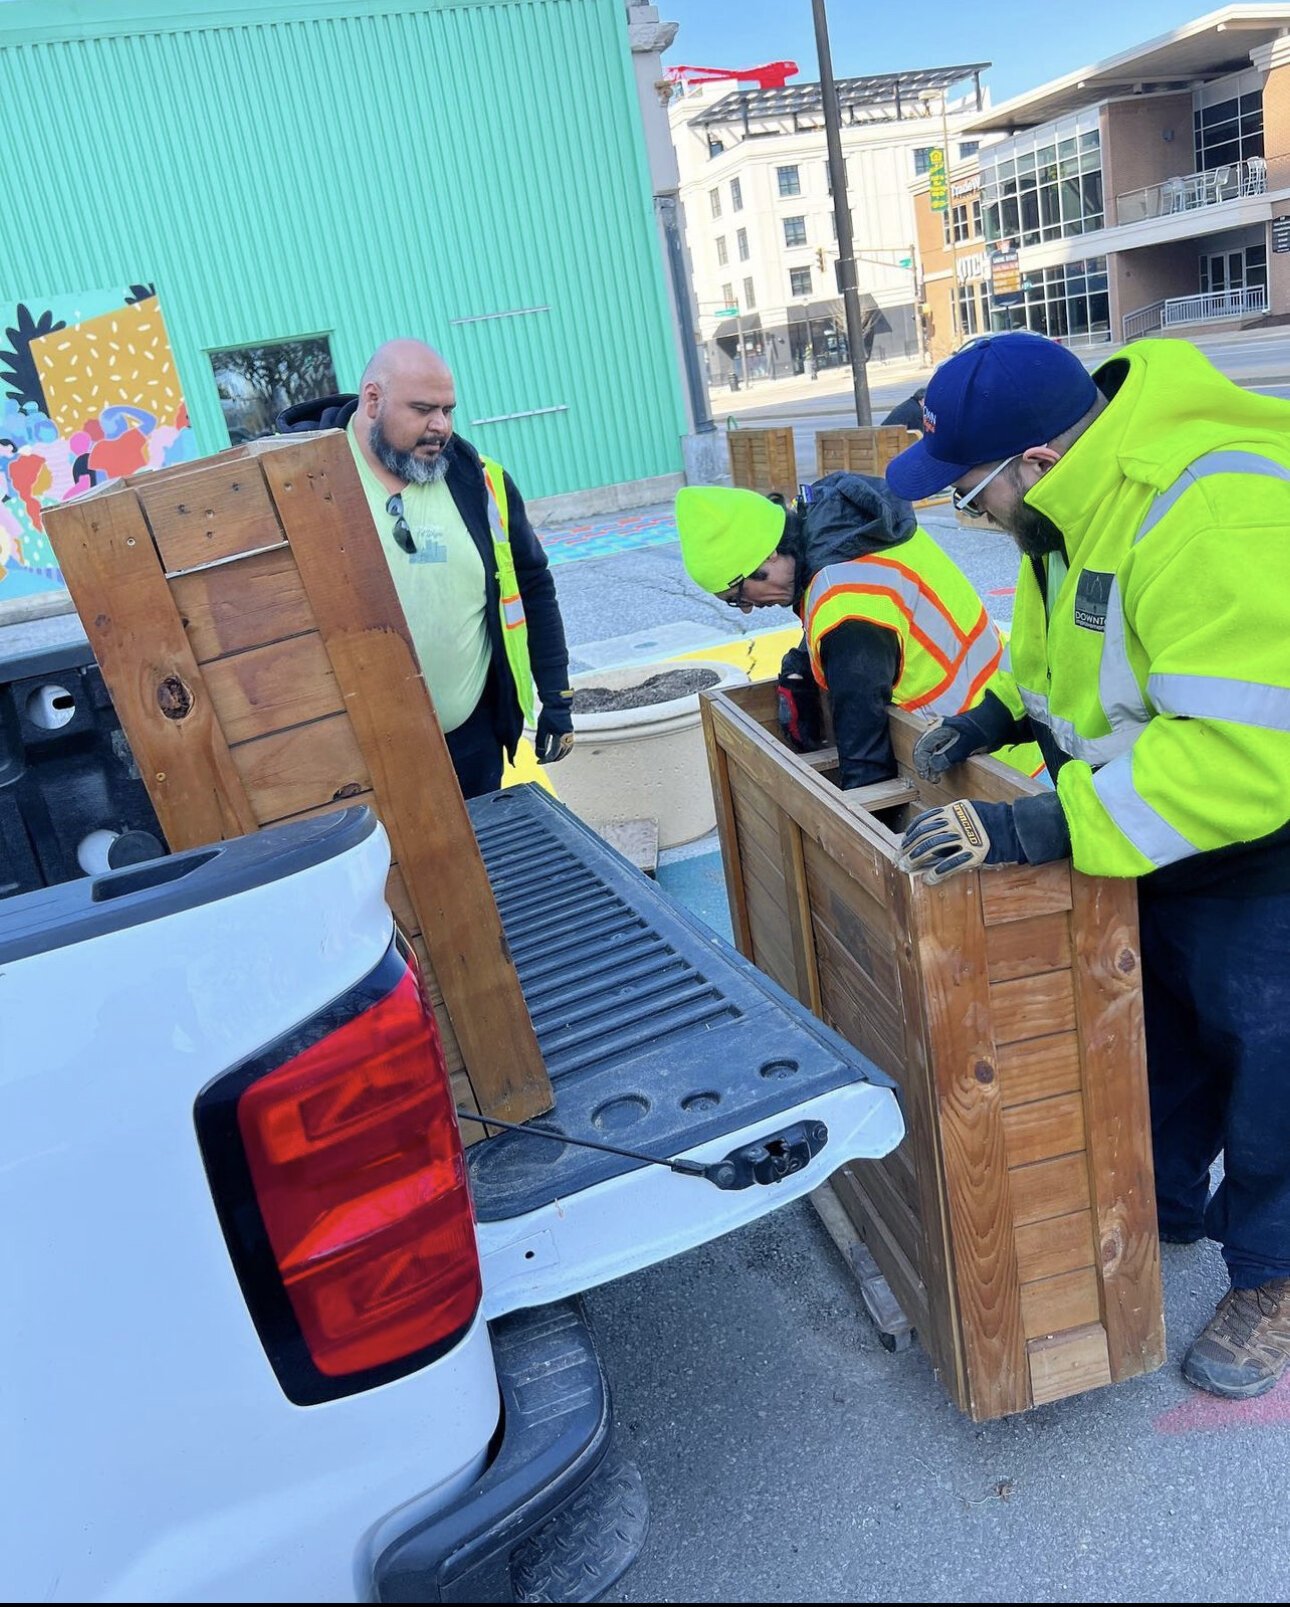 The Clean & Green team from Downtown Fort Wayne has been spending the last week getting public spaces throughout Downtown Fort Wayne ready for the warmer weather.